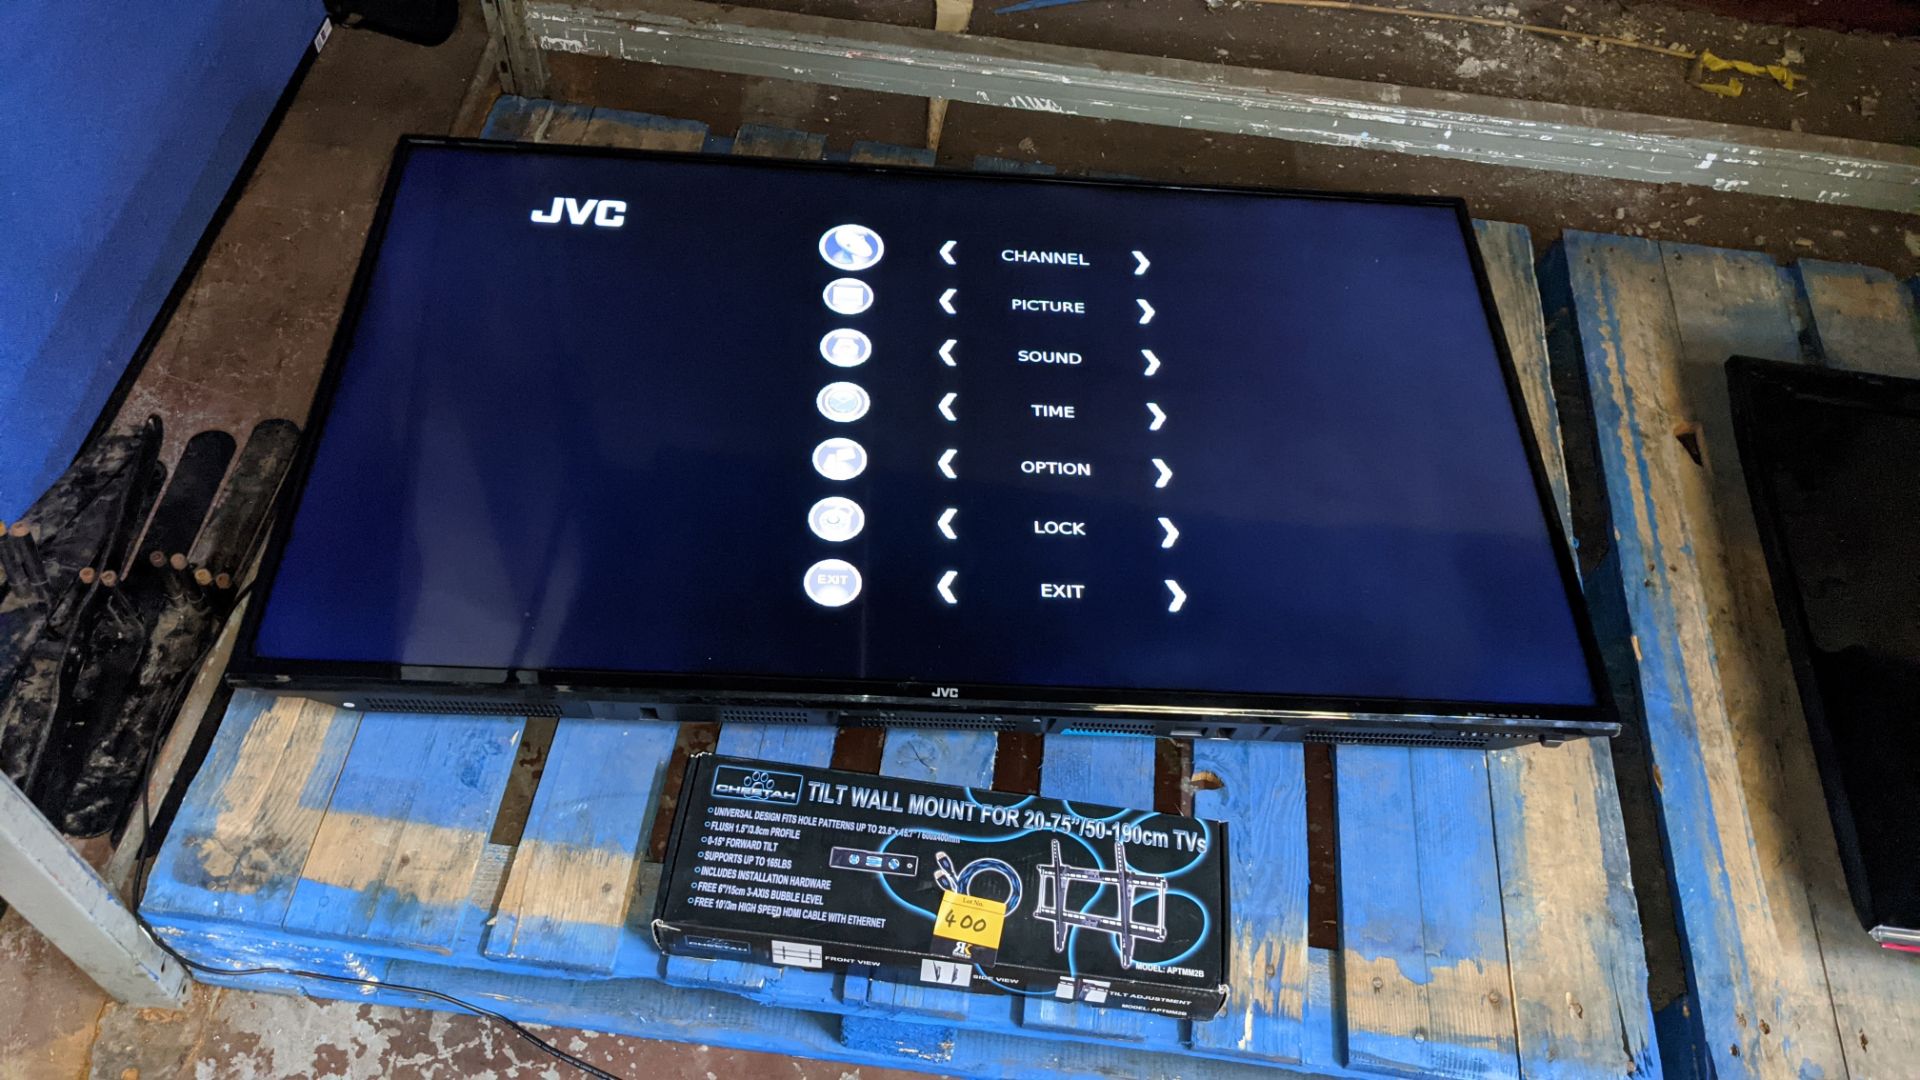 JVC 50" TV including wall-mount, model LT-50C550 - with Remote - Image 4 of 9